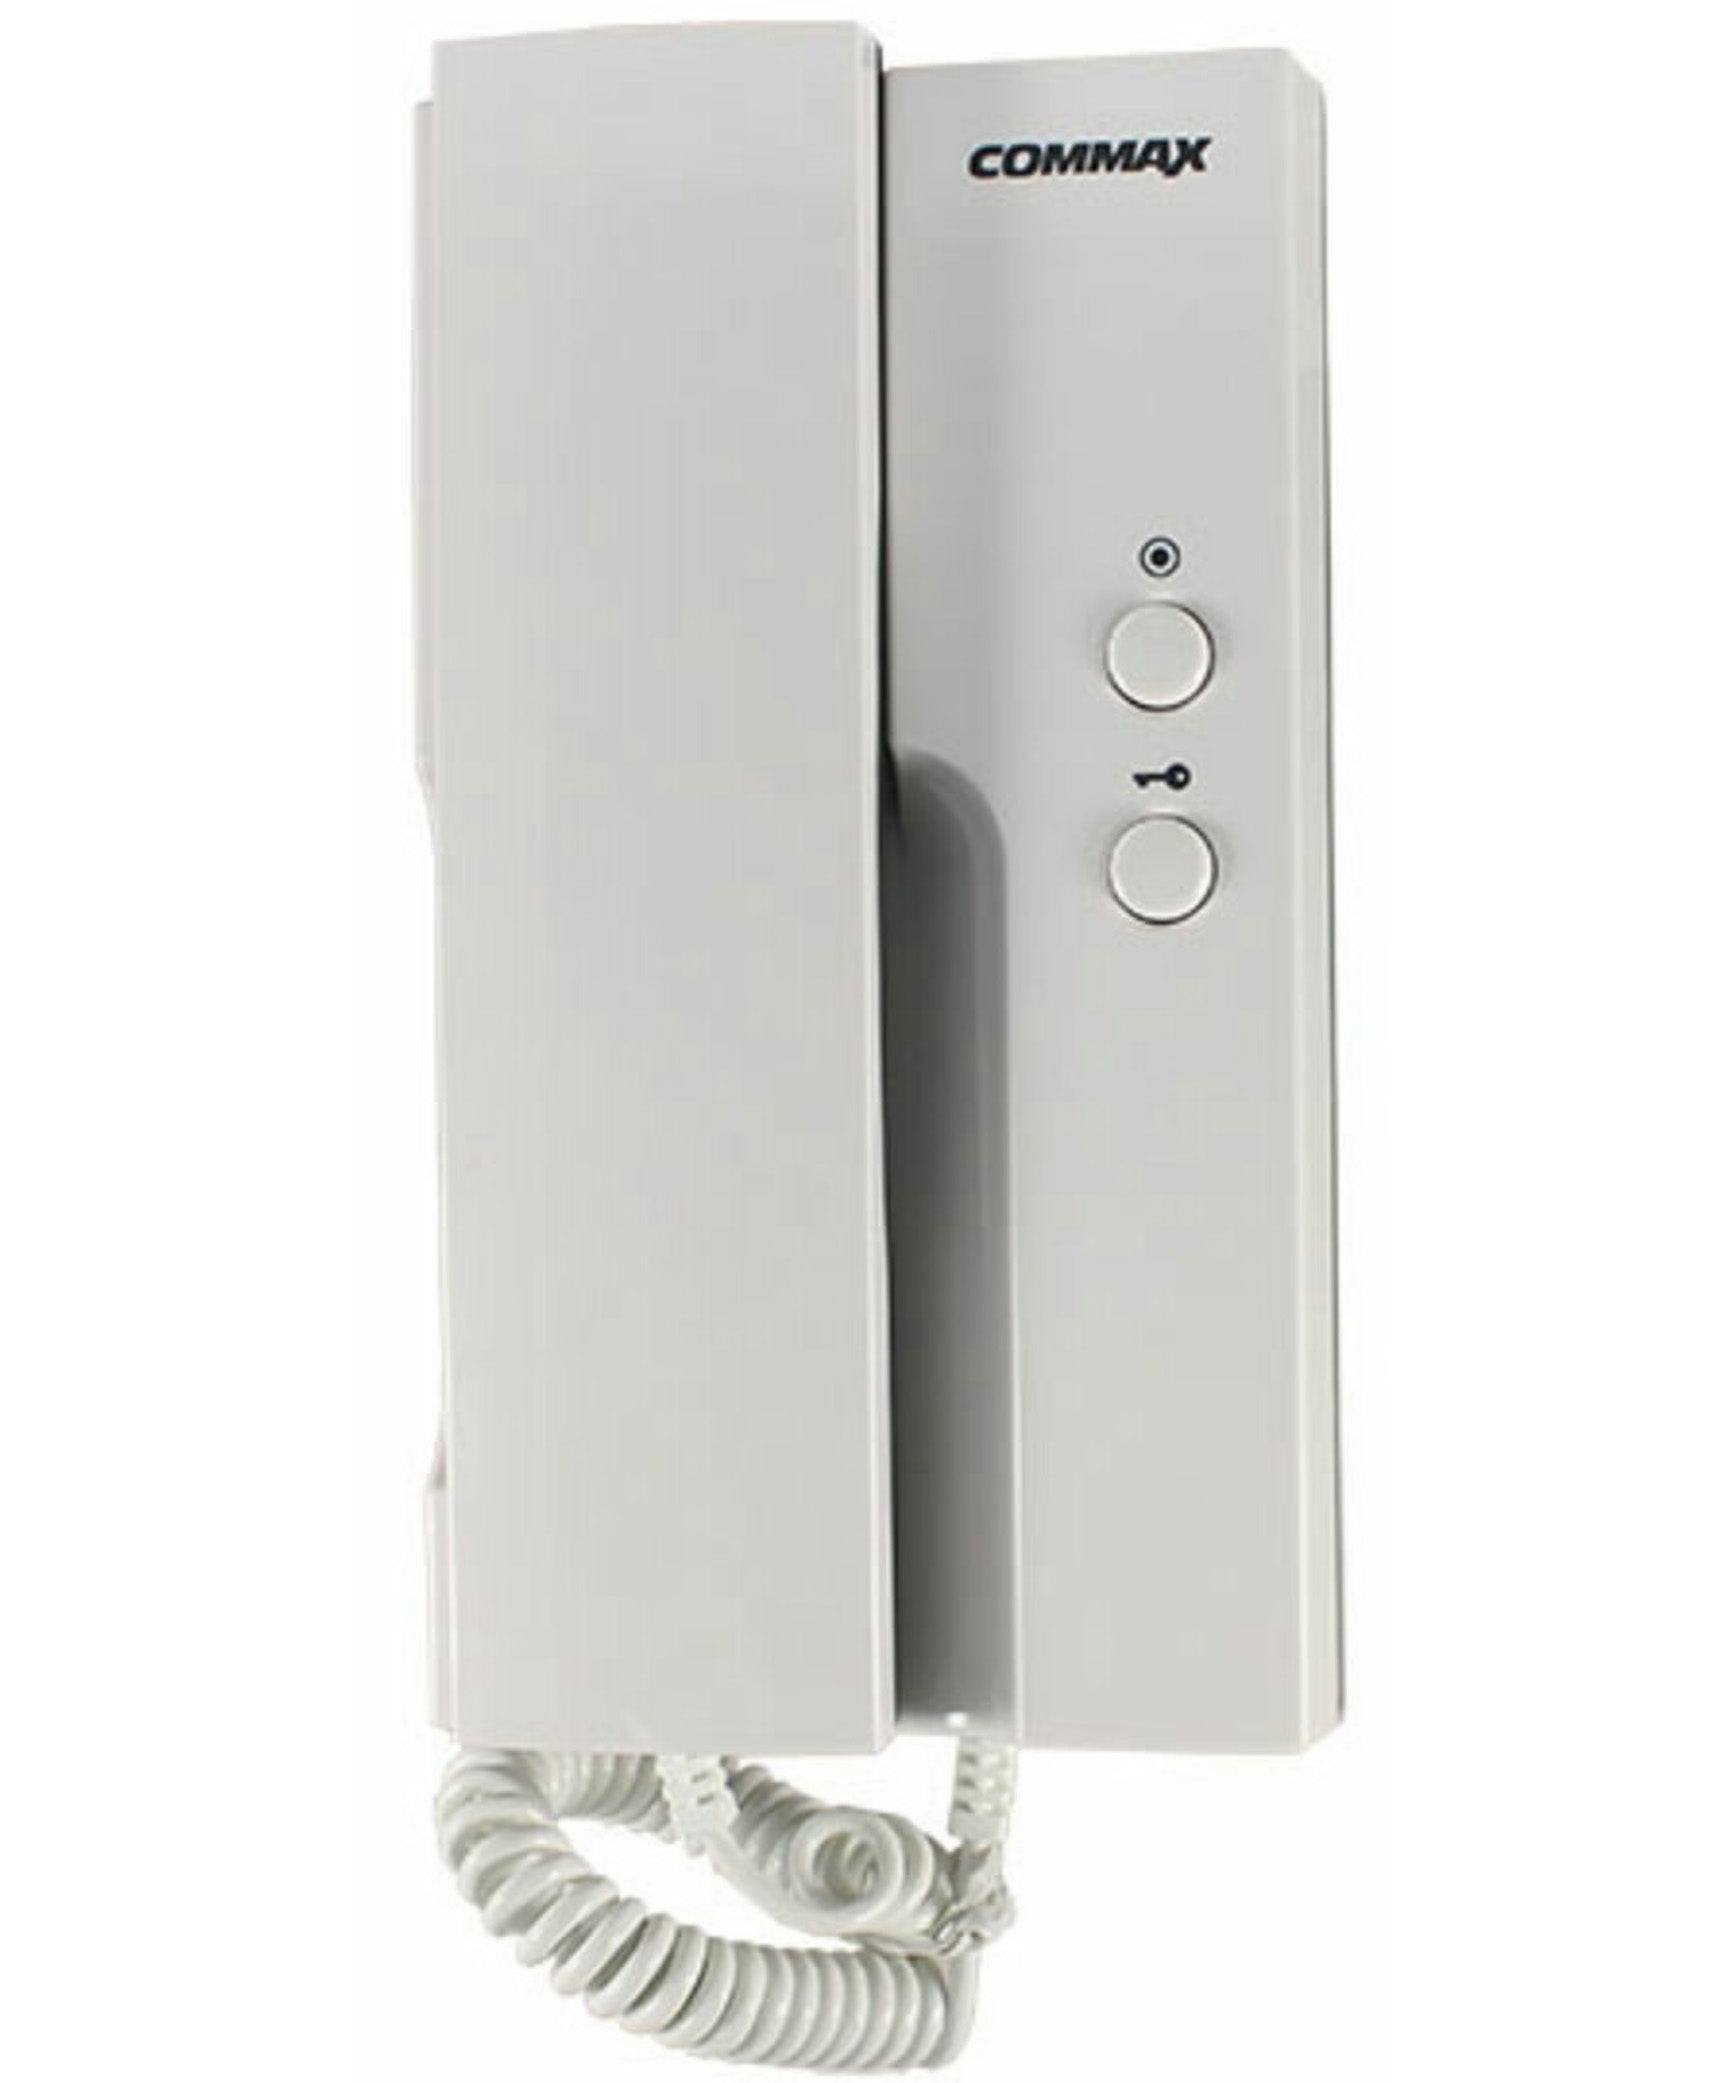 Commax Audio Door Phone Connectable for Fine View Monitor, DP4VHP